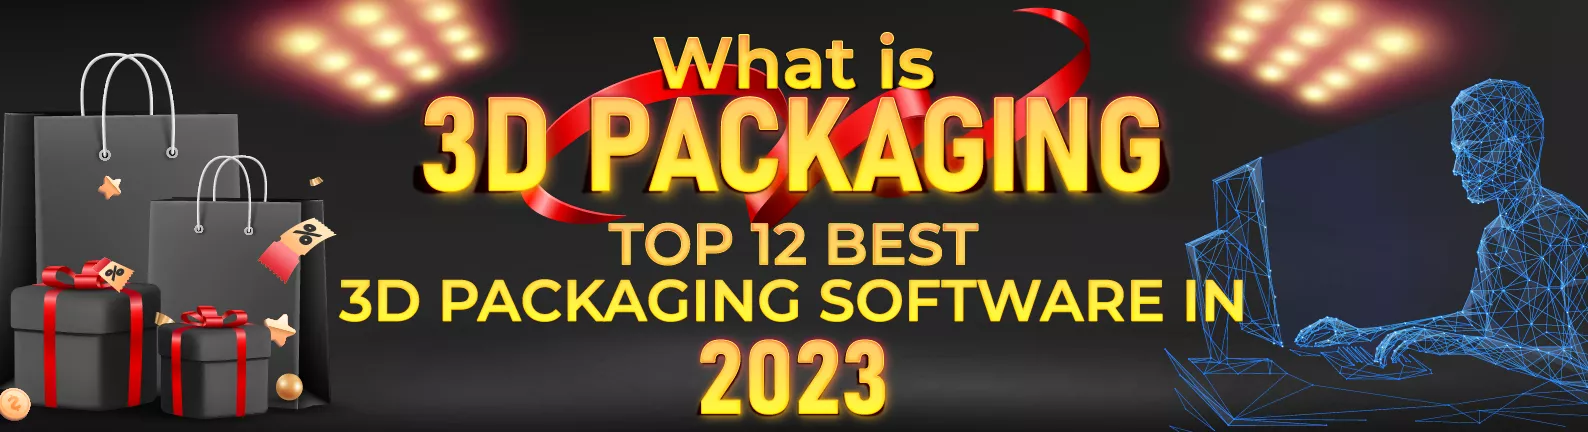 What are 3D Packaging and Top 12 Best 3D Packaging Software in 2023